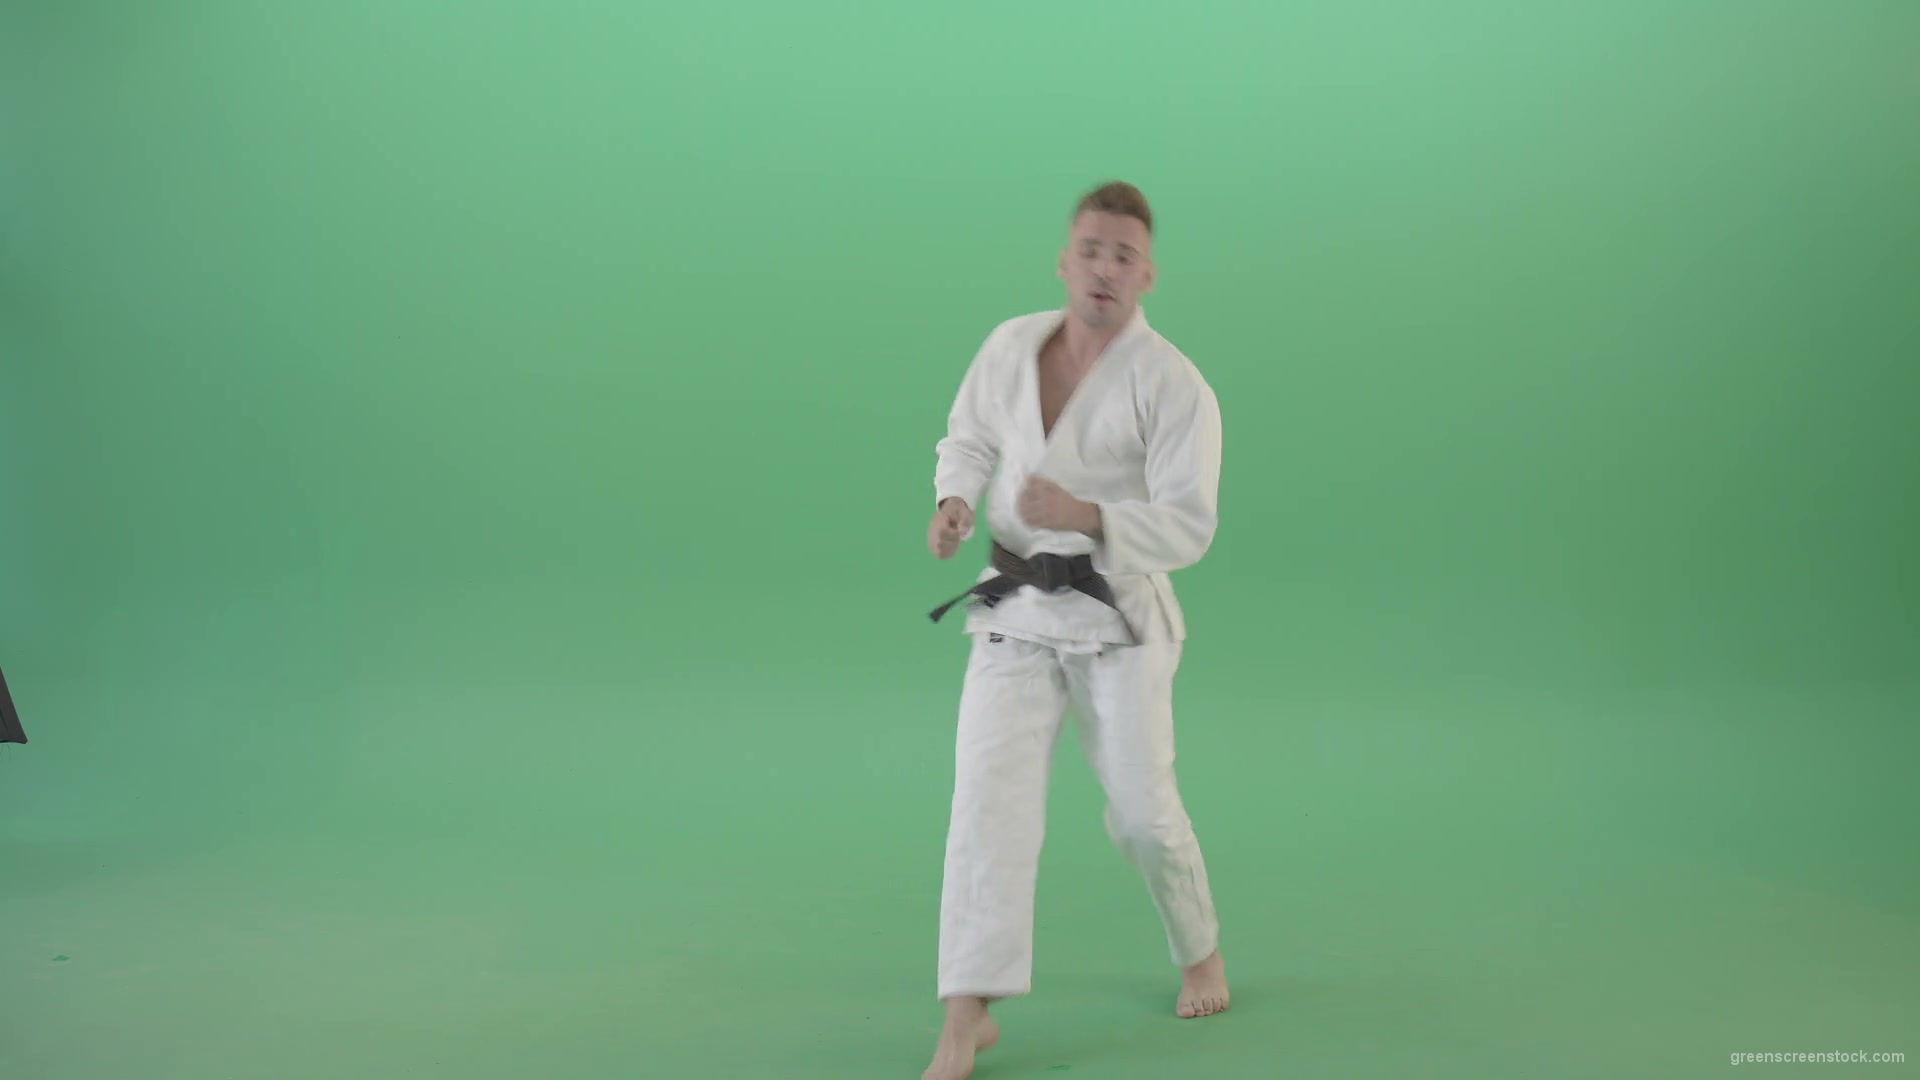 Jujutsu-Sportman-make-front-kick-and-punch-isolated-on-green-screen-4K-Video-Footage-1920_005 Green Screen Stock